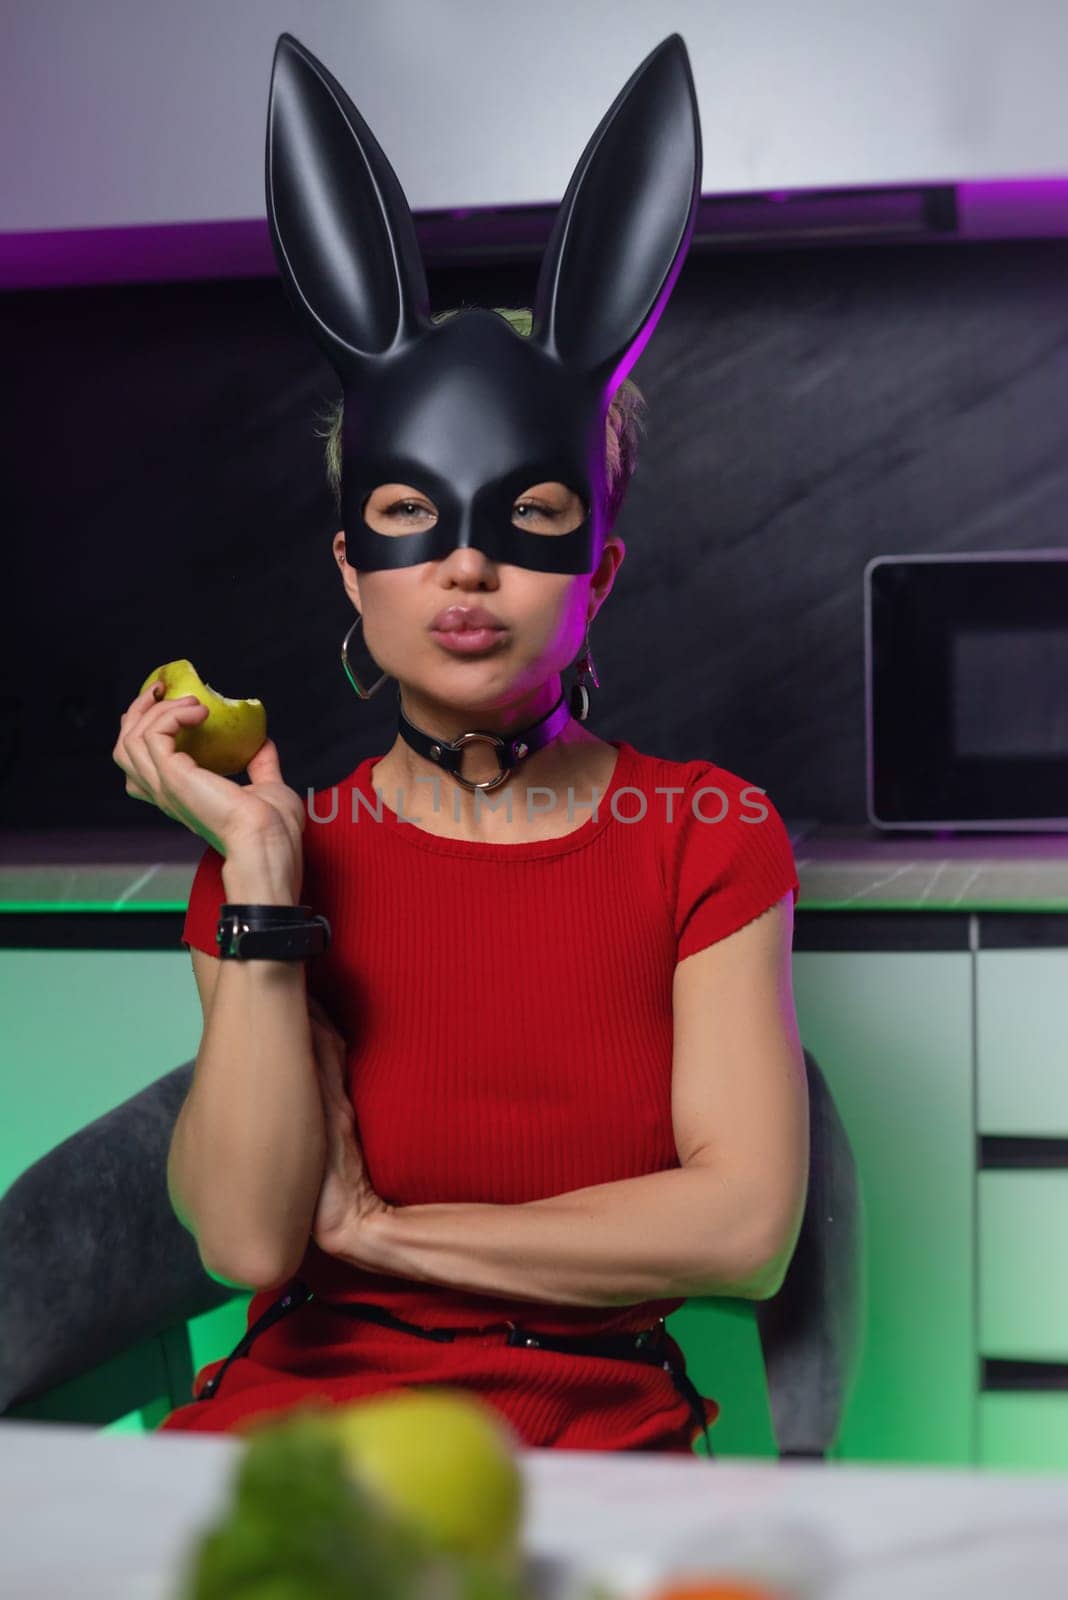 beautiful girl in a bdsm rabbit mask and a bright red dress eats an apple in the kitchen in neon light promoting a healthy lifestyle vegetarianism by Rotozey